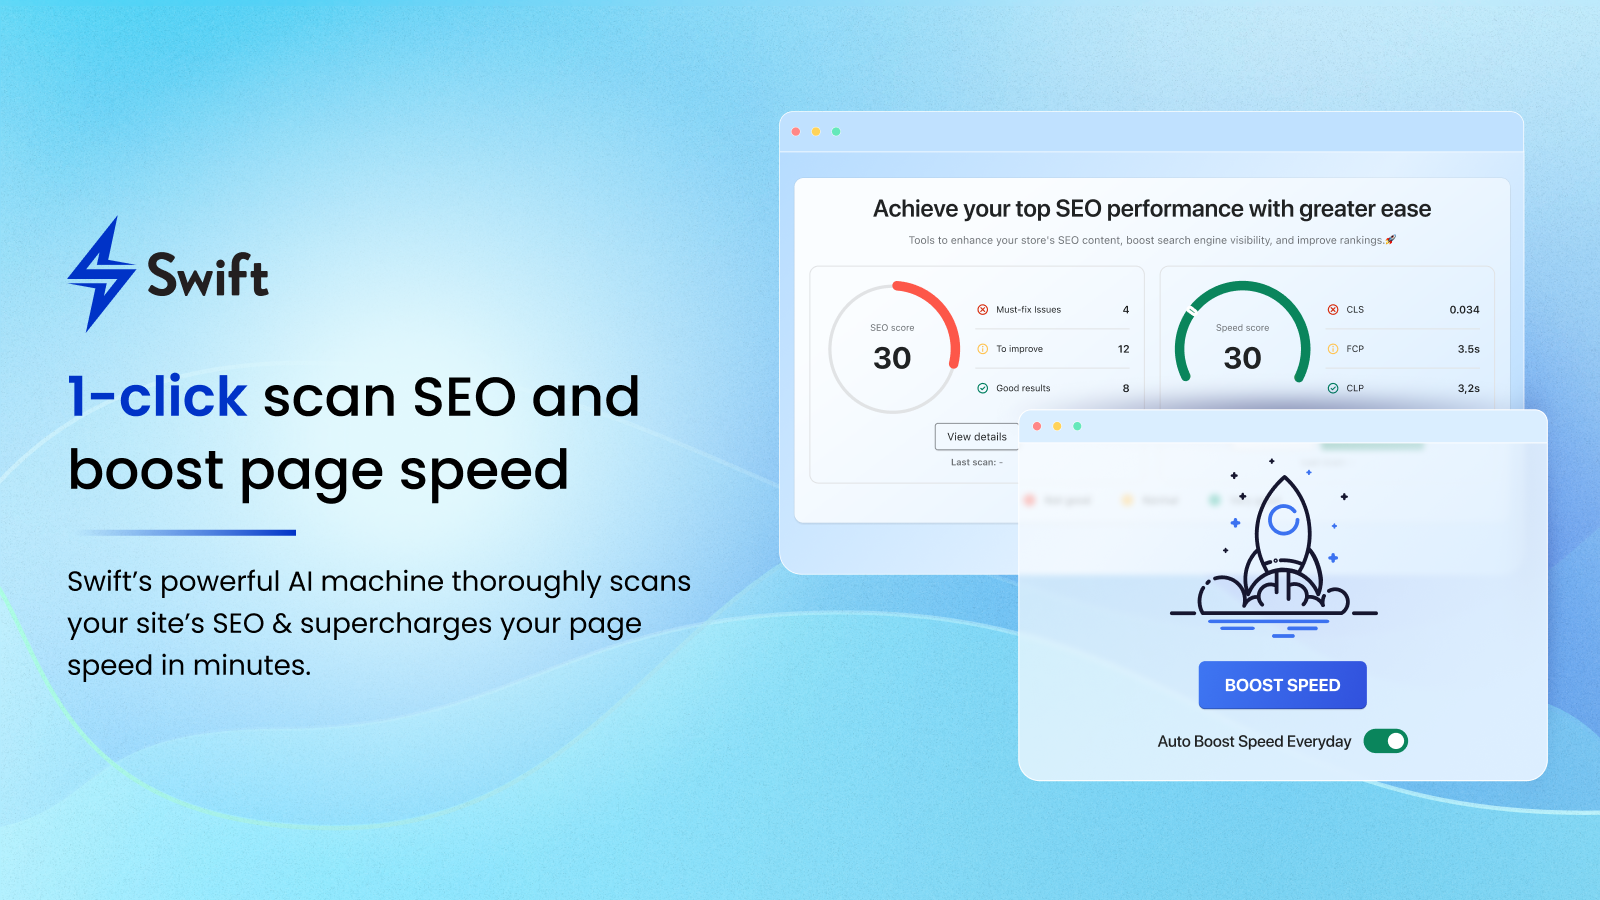 1-click scan SEO and boost page speed